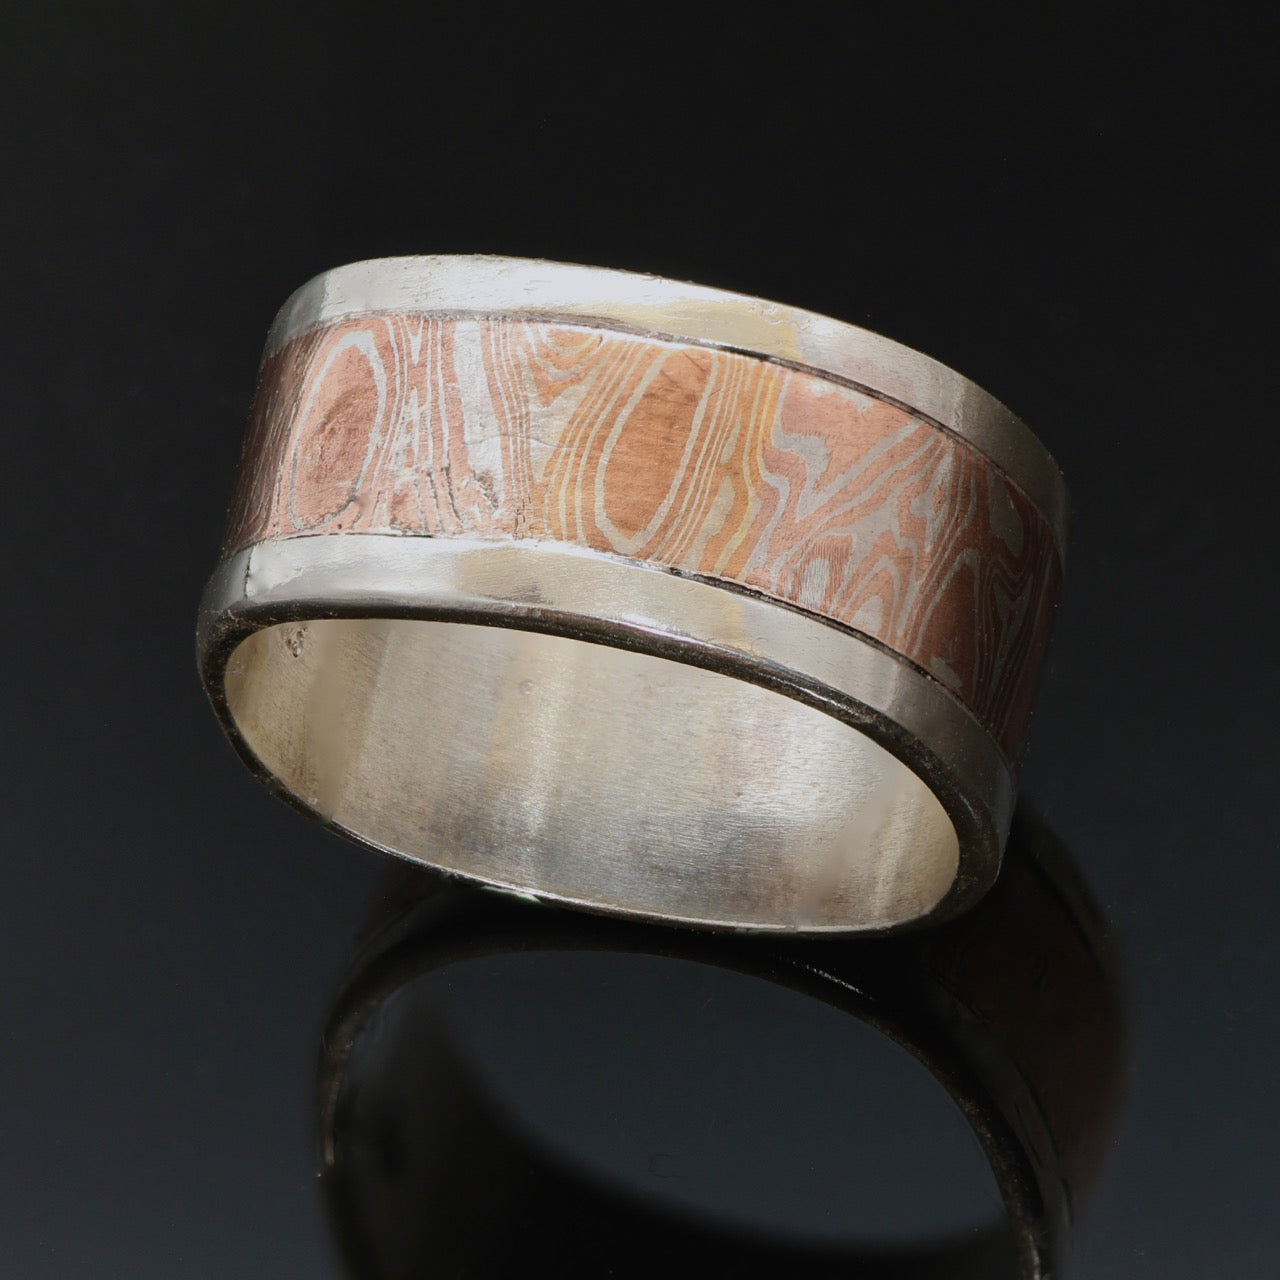 11mm wide Silver band with a centre band of mokume gane. The mokume has a wavy wood grain pattern and is made with copper and silver.  